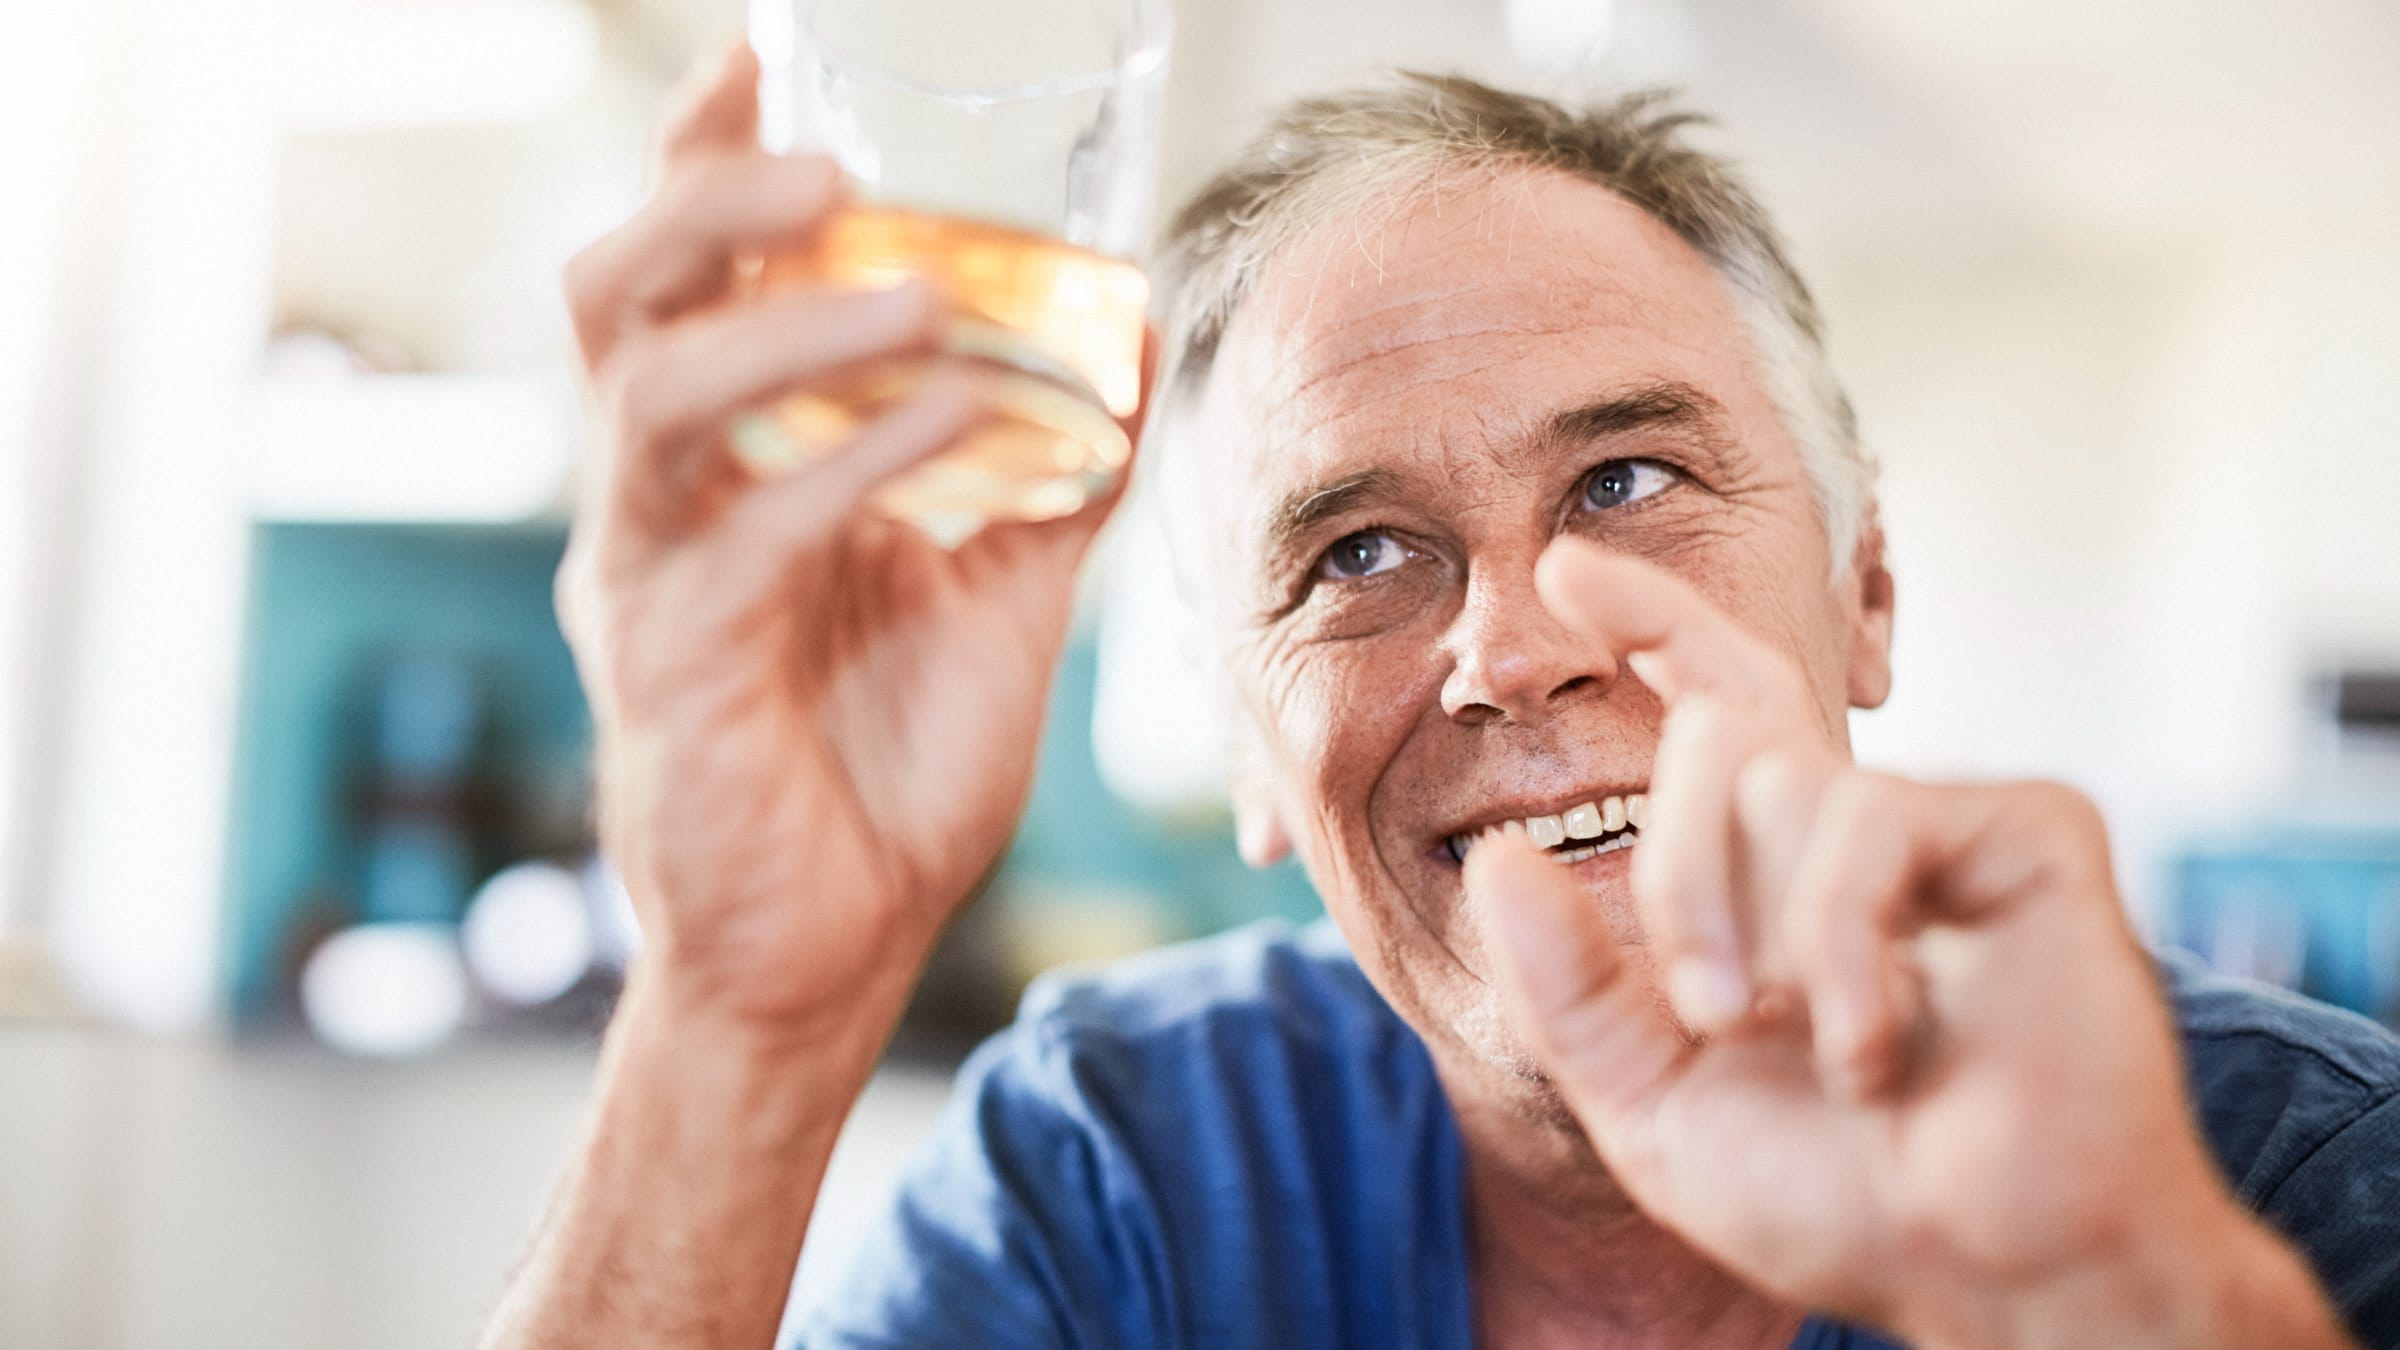 Cheerful man holding a glass of alcohol